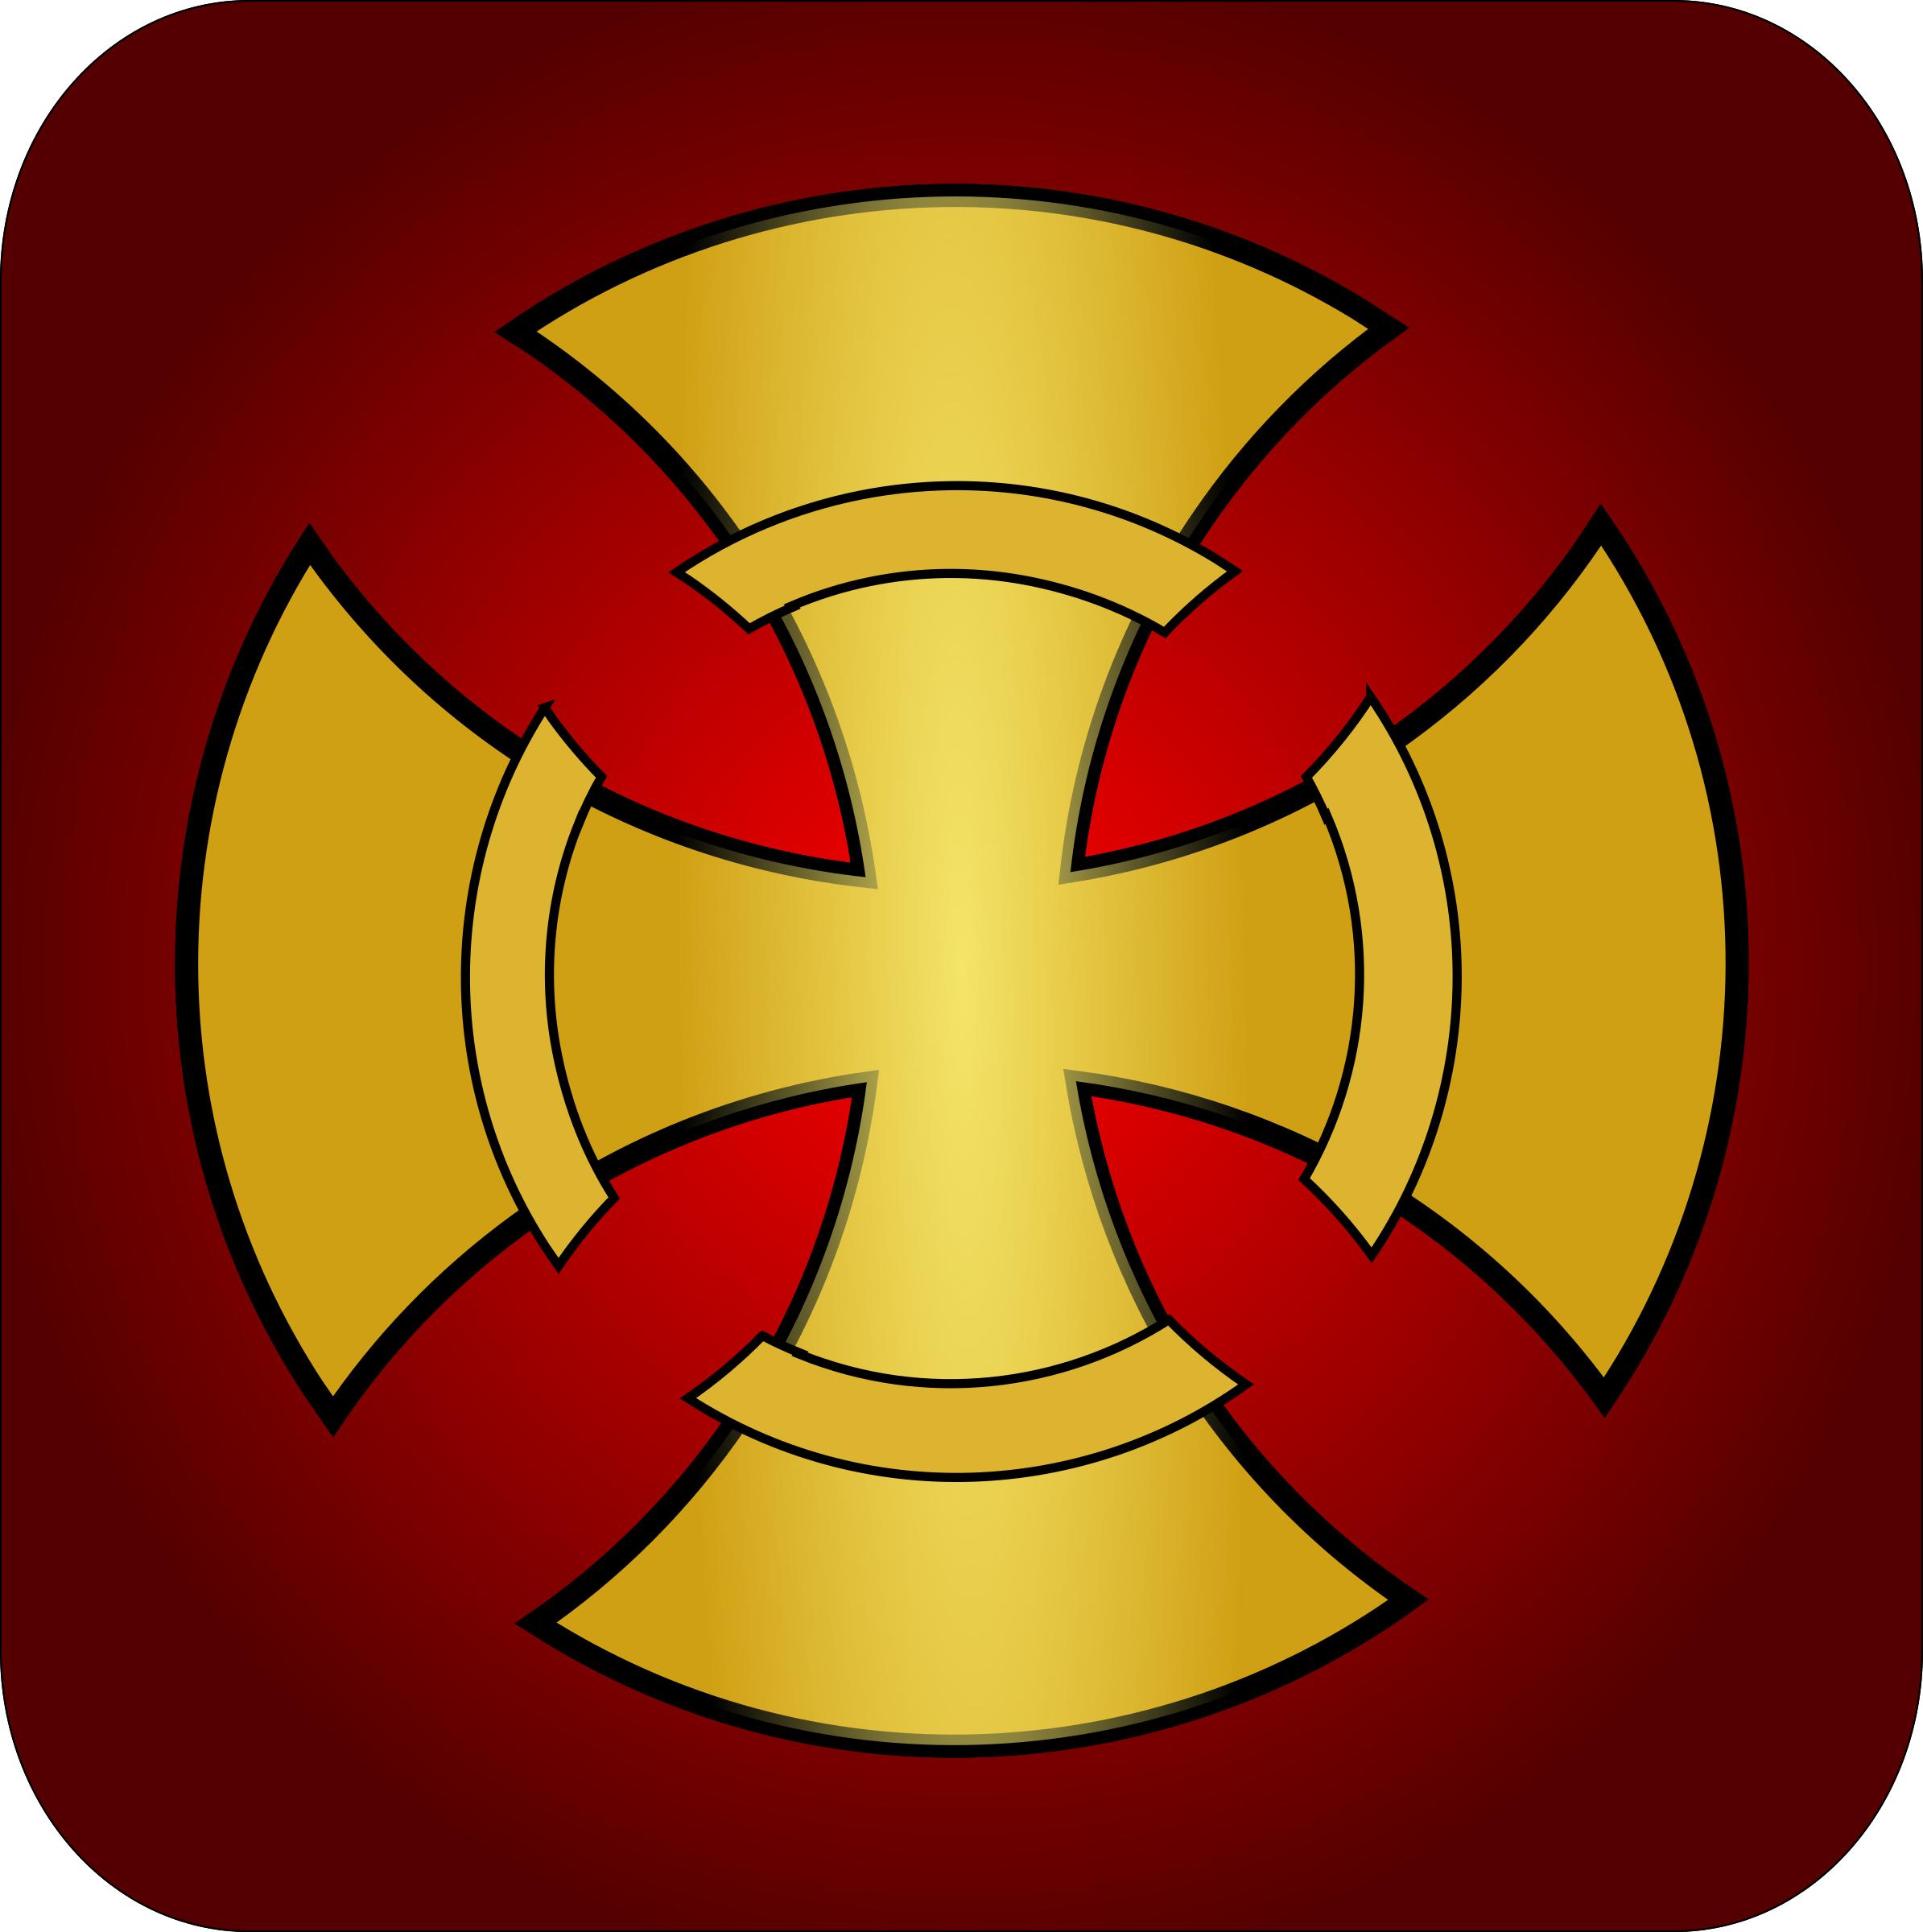 Golden cross 2 PNG icons